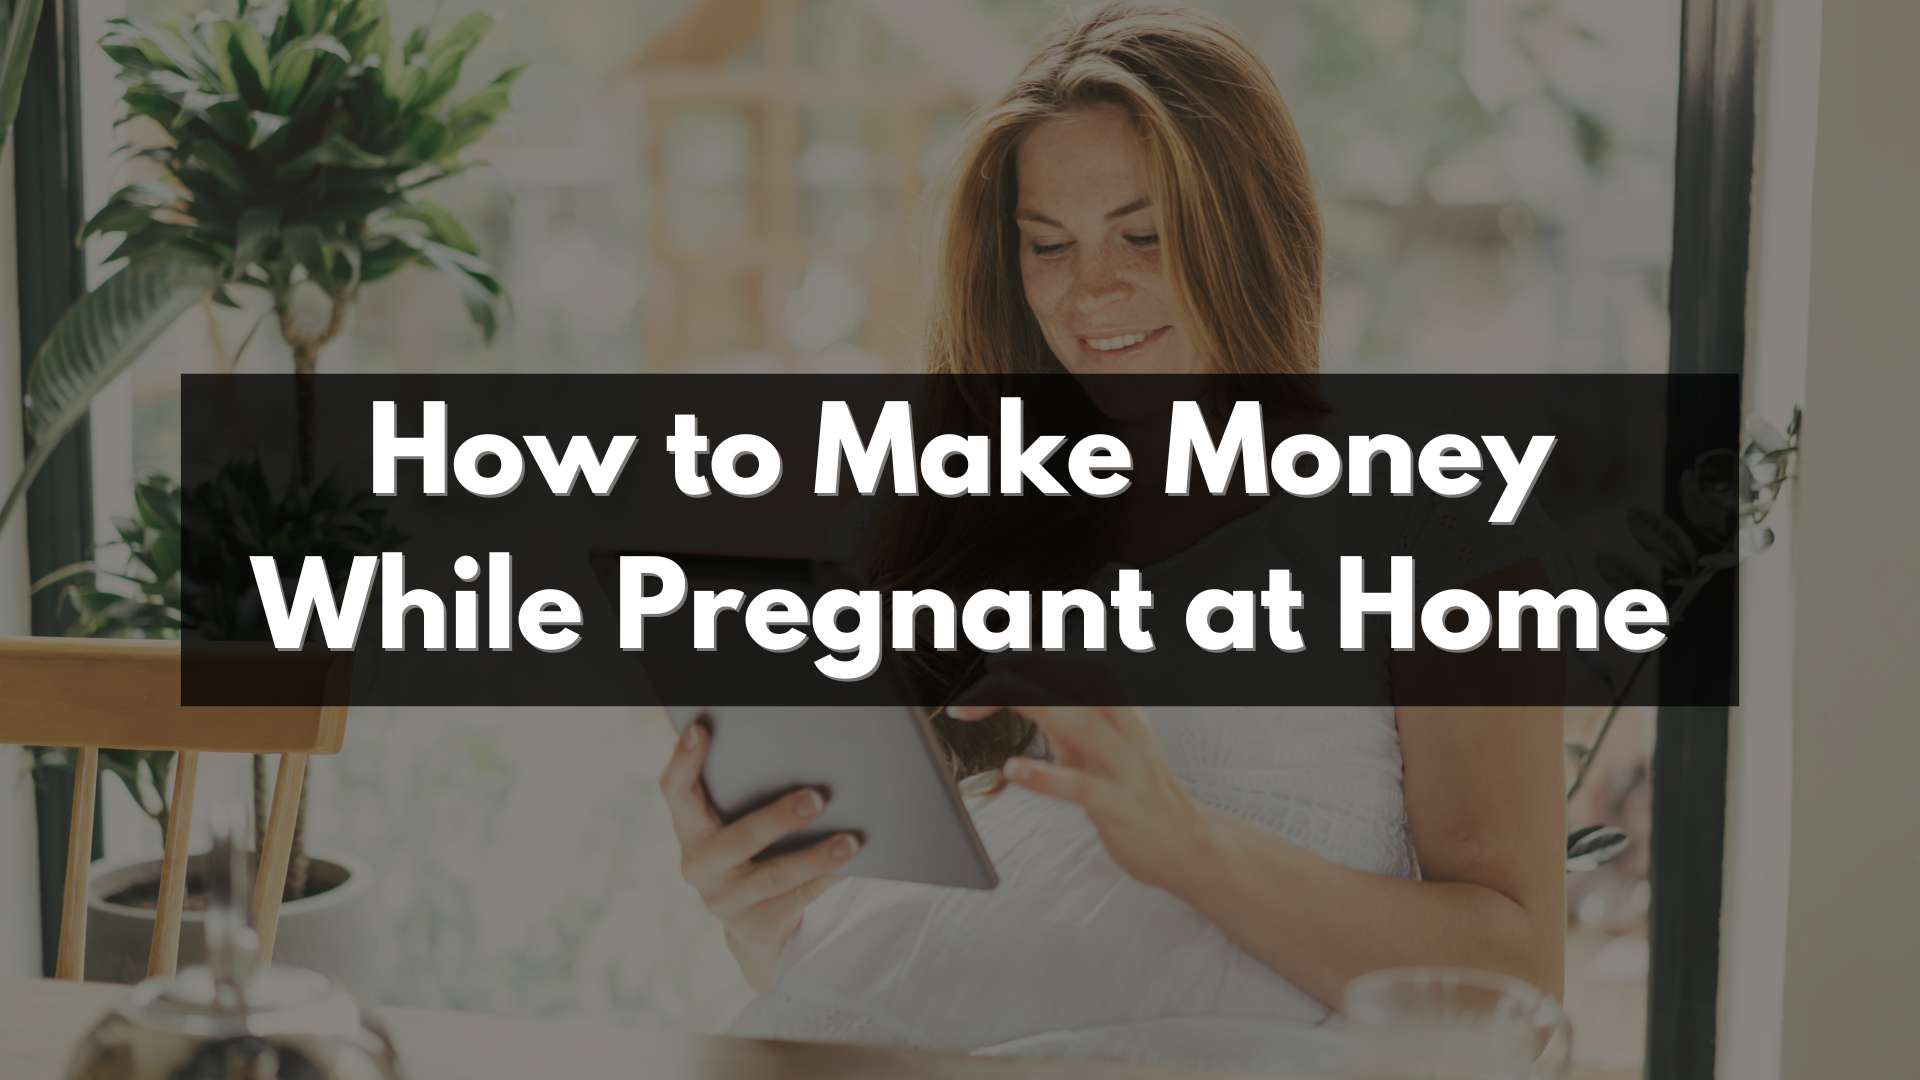 How to make money while pregnant at home